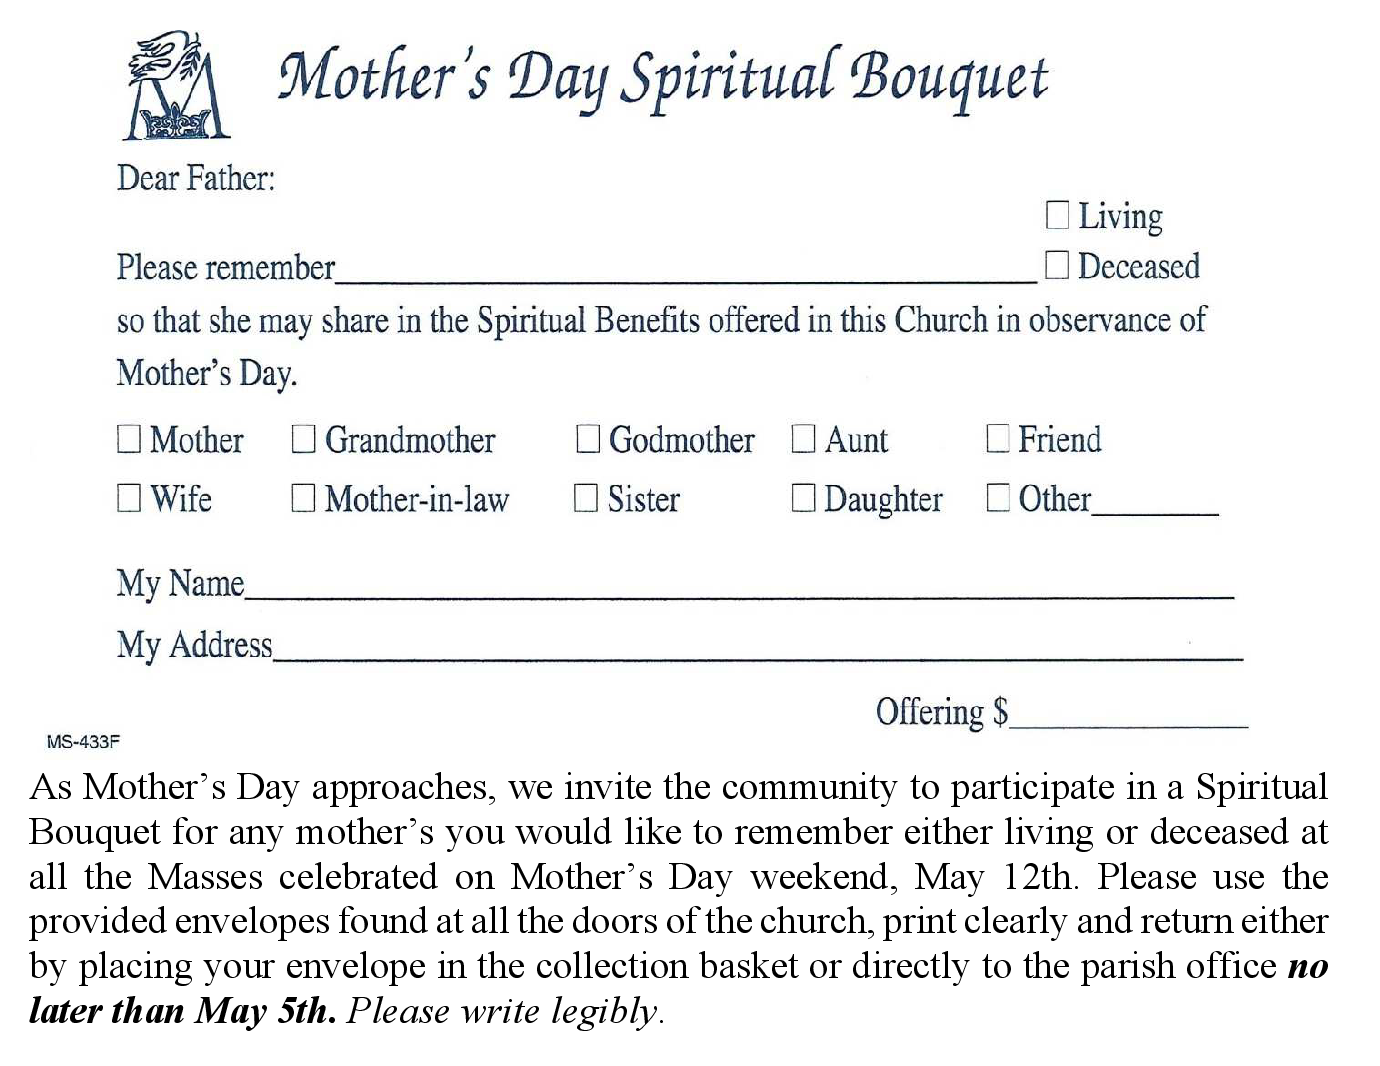 Mother's Day Spiritual Bouquet